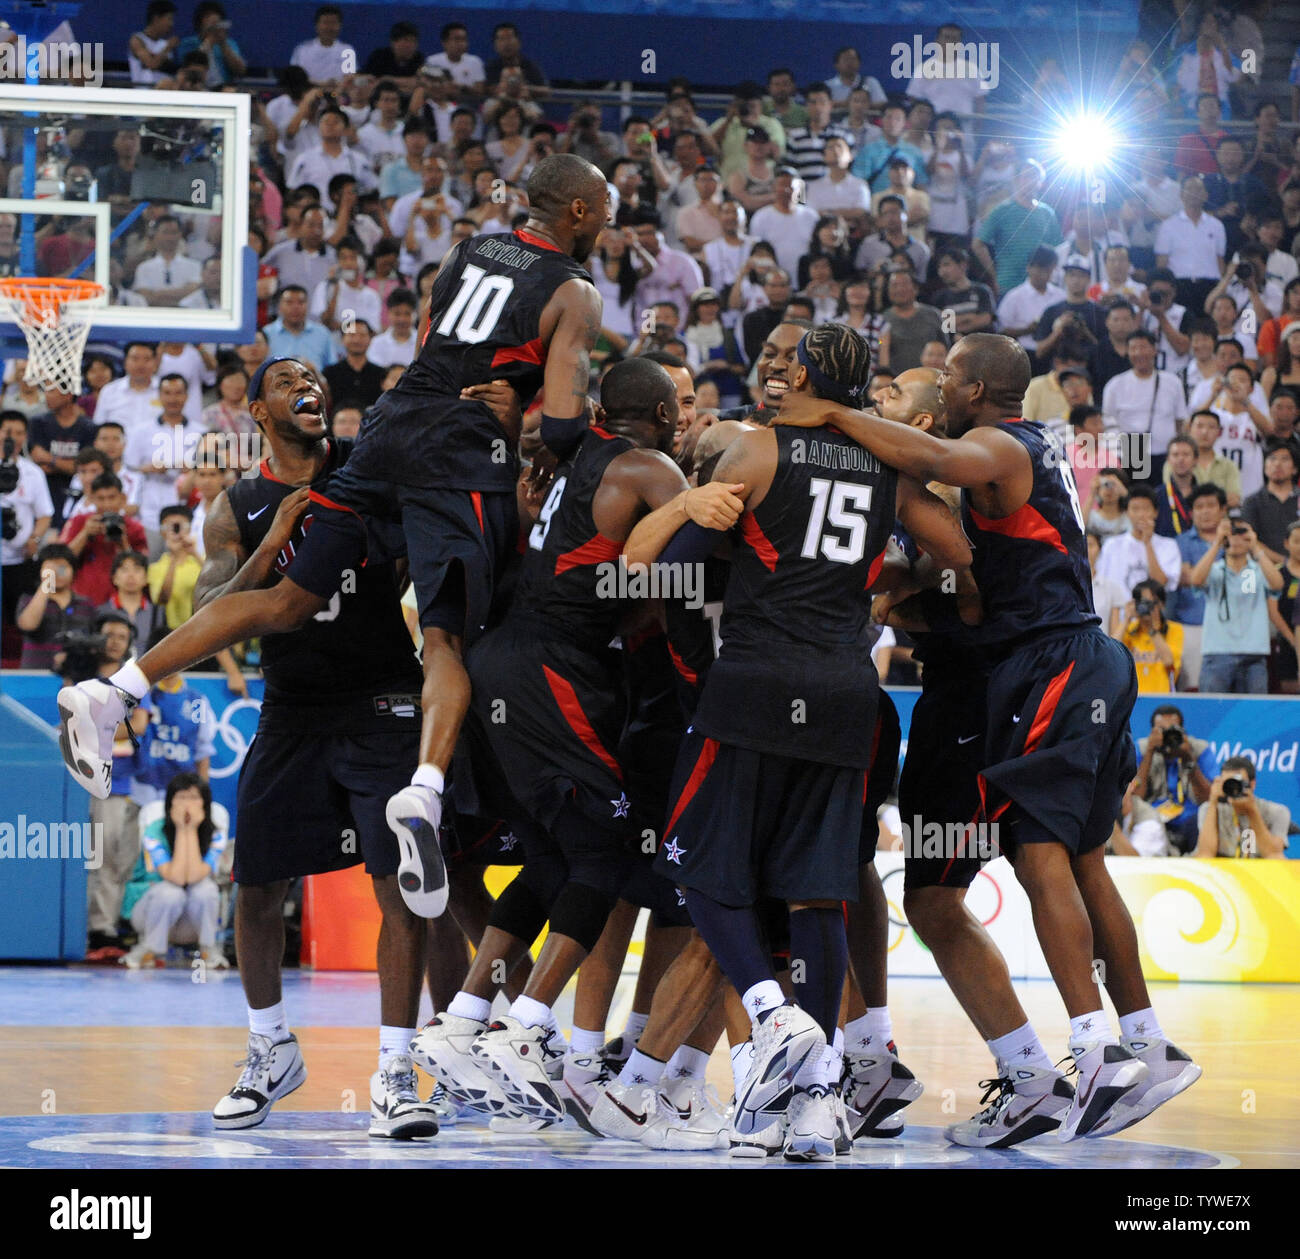 The Usa Team Celebrates Their Win Over Spain To Claim The Gold Medal For Men S Basketball During The 08 Summer Olympics In Beijing On August 24 08 The Us Won 118 To